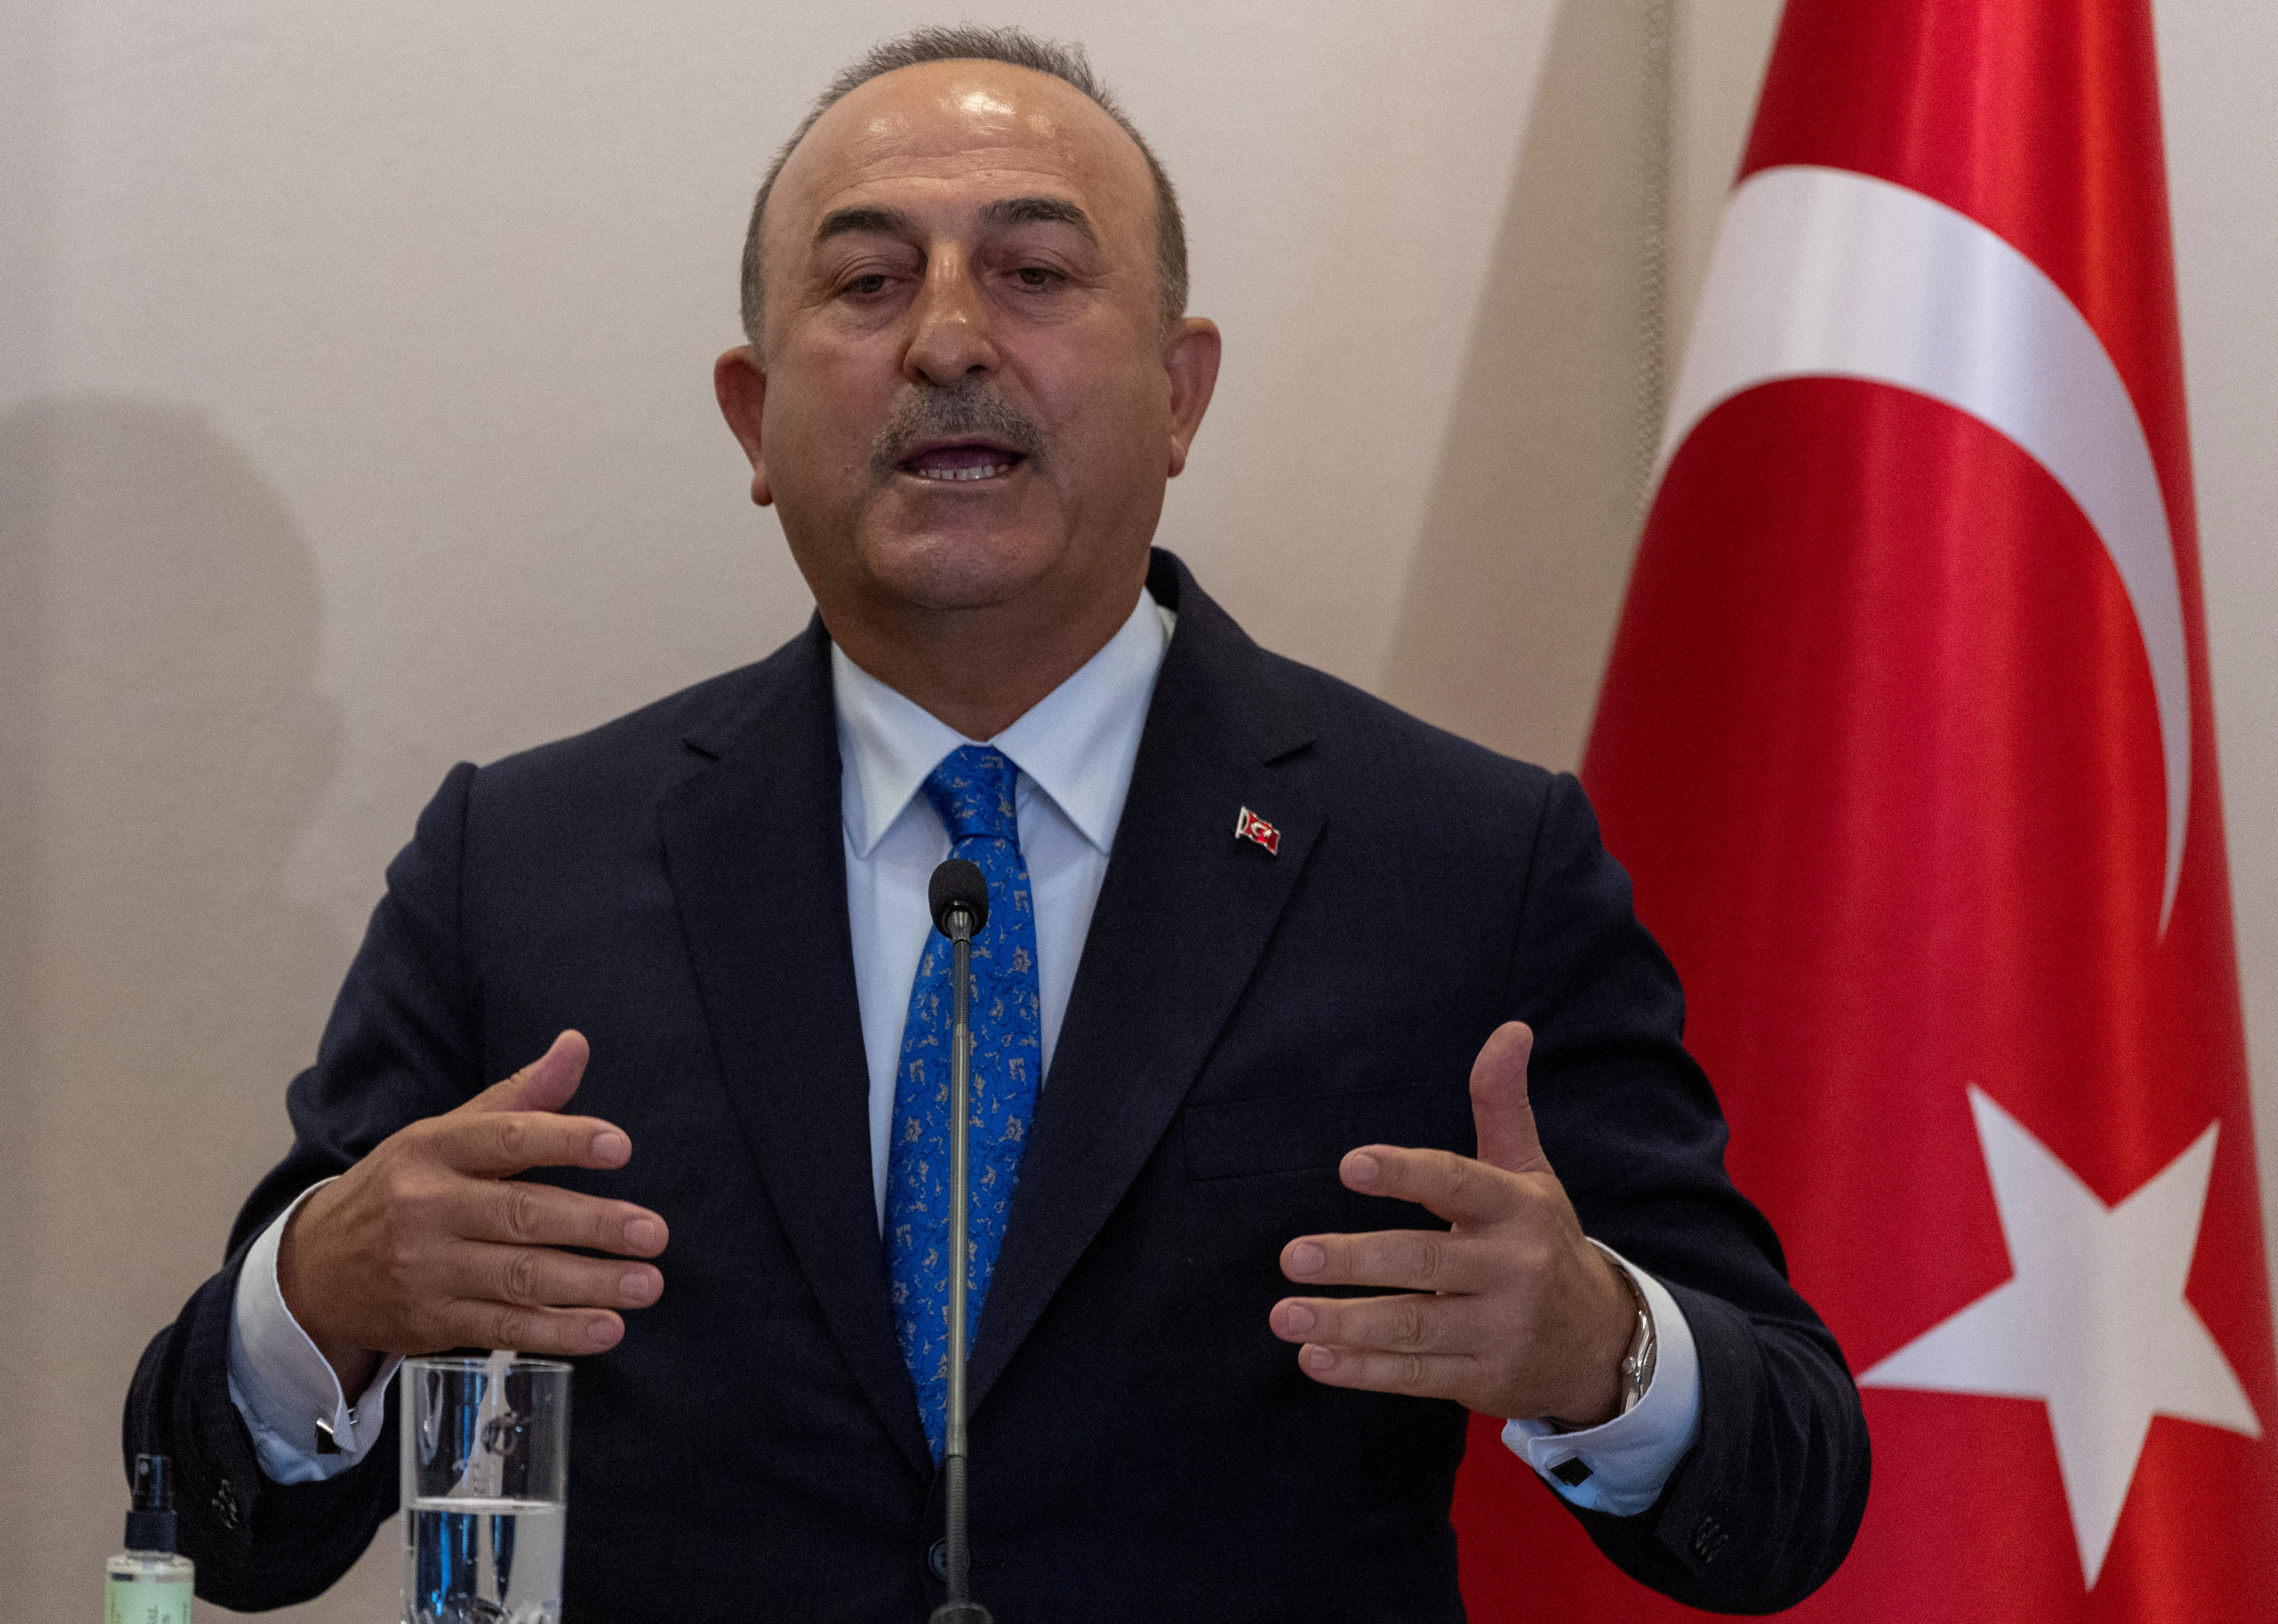 Turkish Foreign Minister Mevlut Cavusoglu and German Foreign Minister Annalena Baerbock attend a news conference in Istanbul